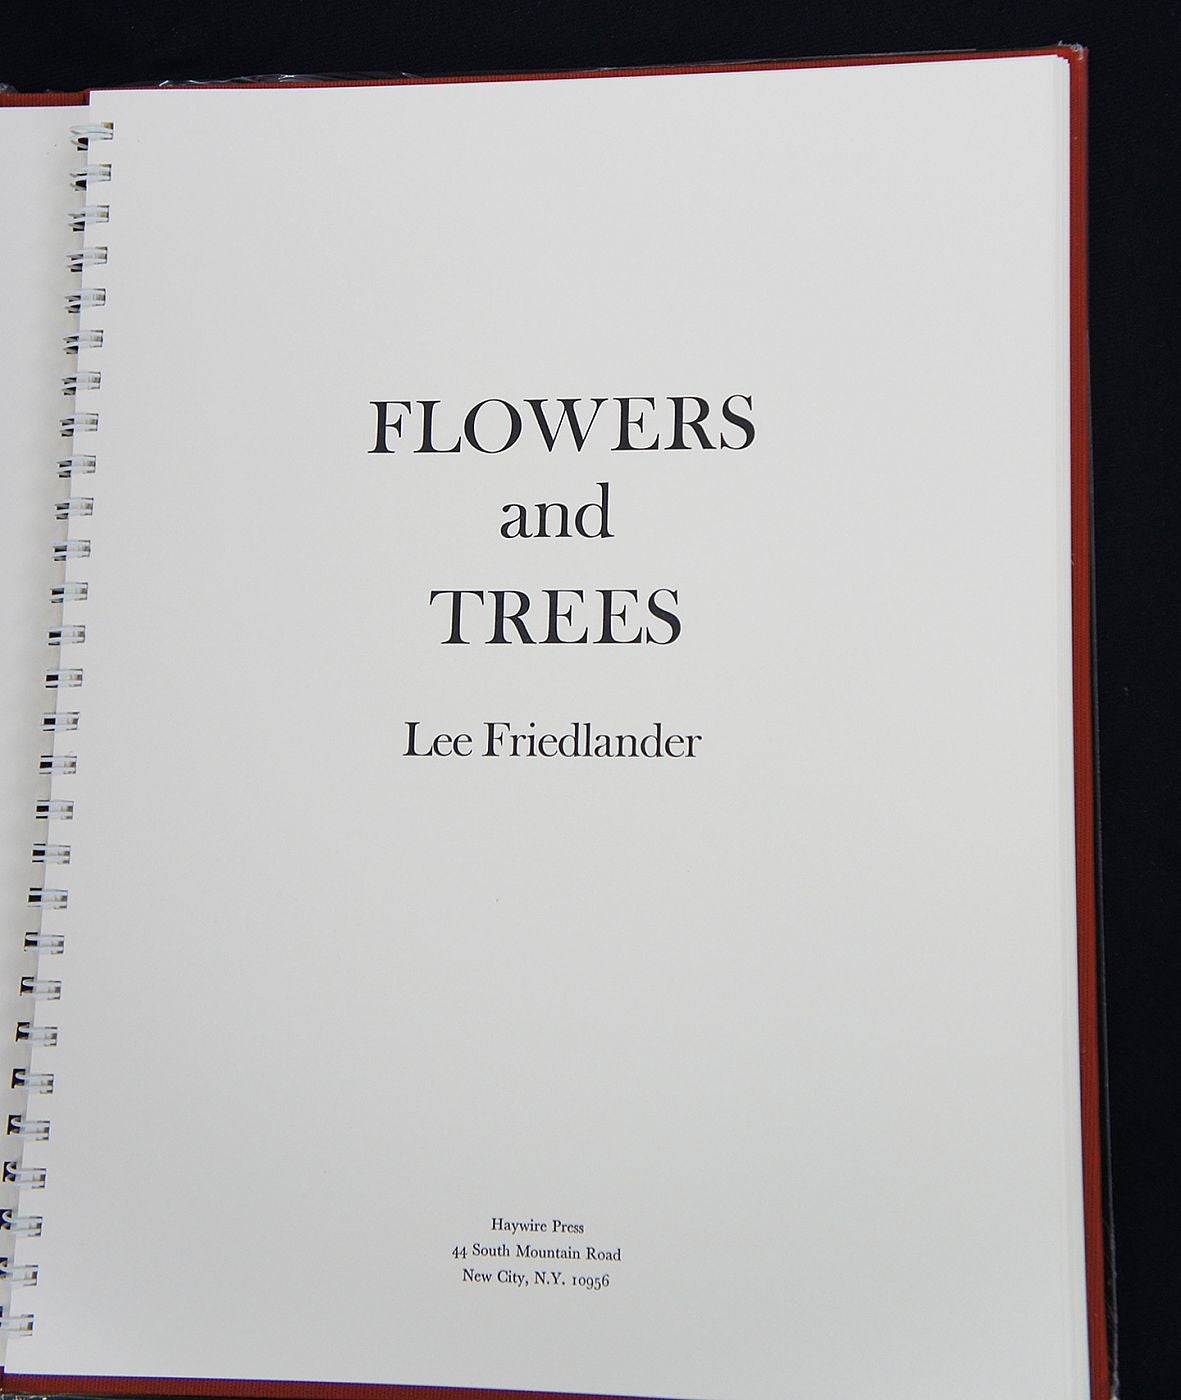 Lee Friedlander: Flowers and Trees (Special Limited Edition with One Vintage Gelatin Silver Print)